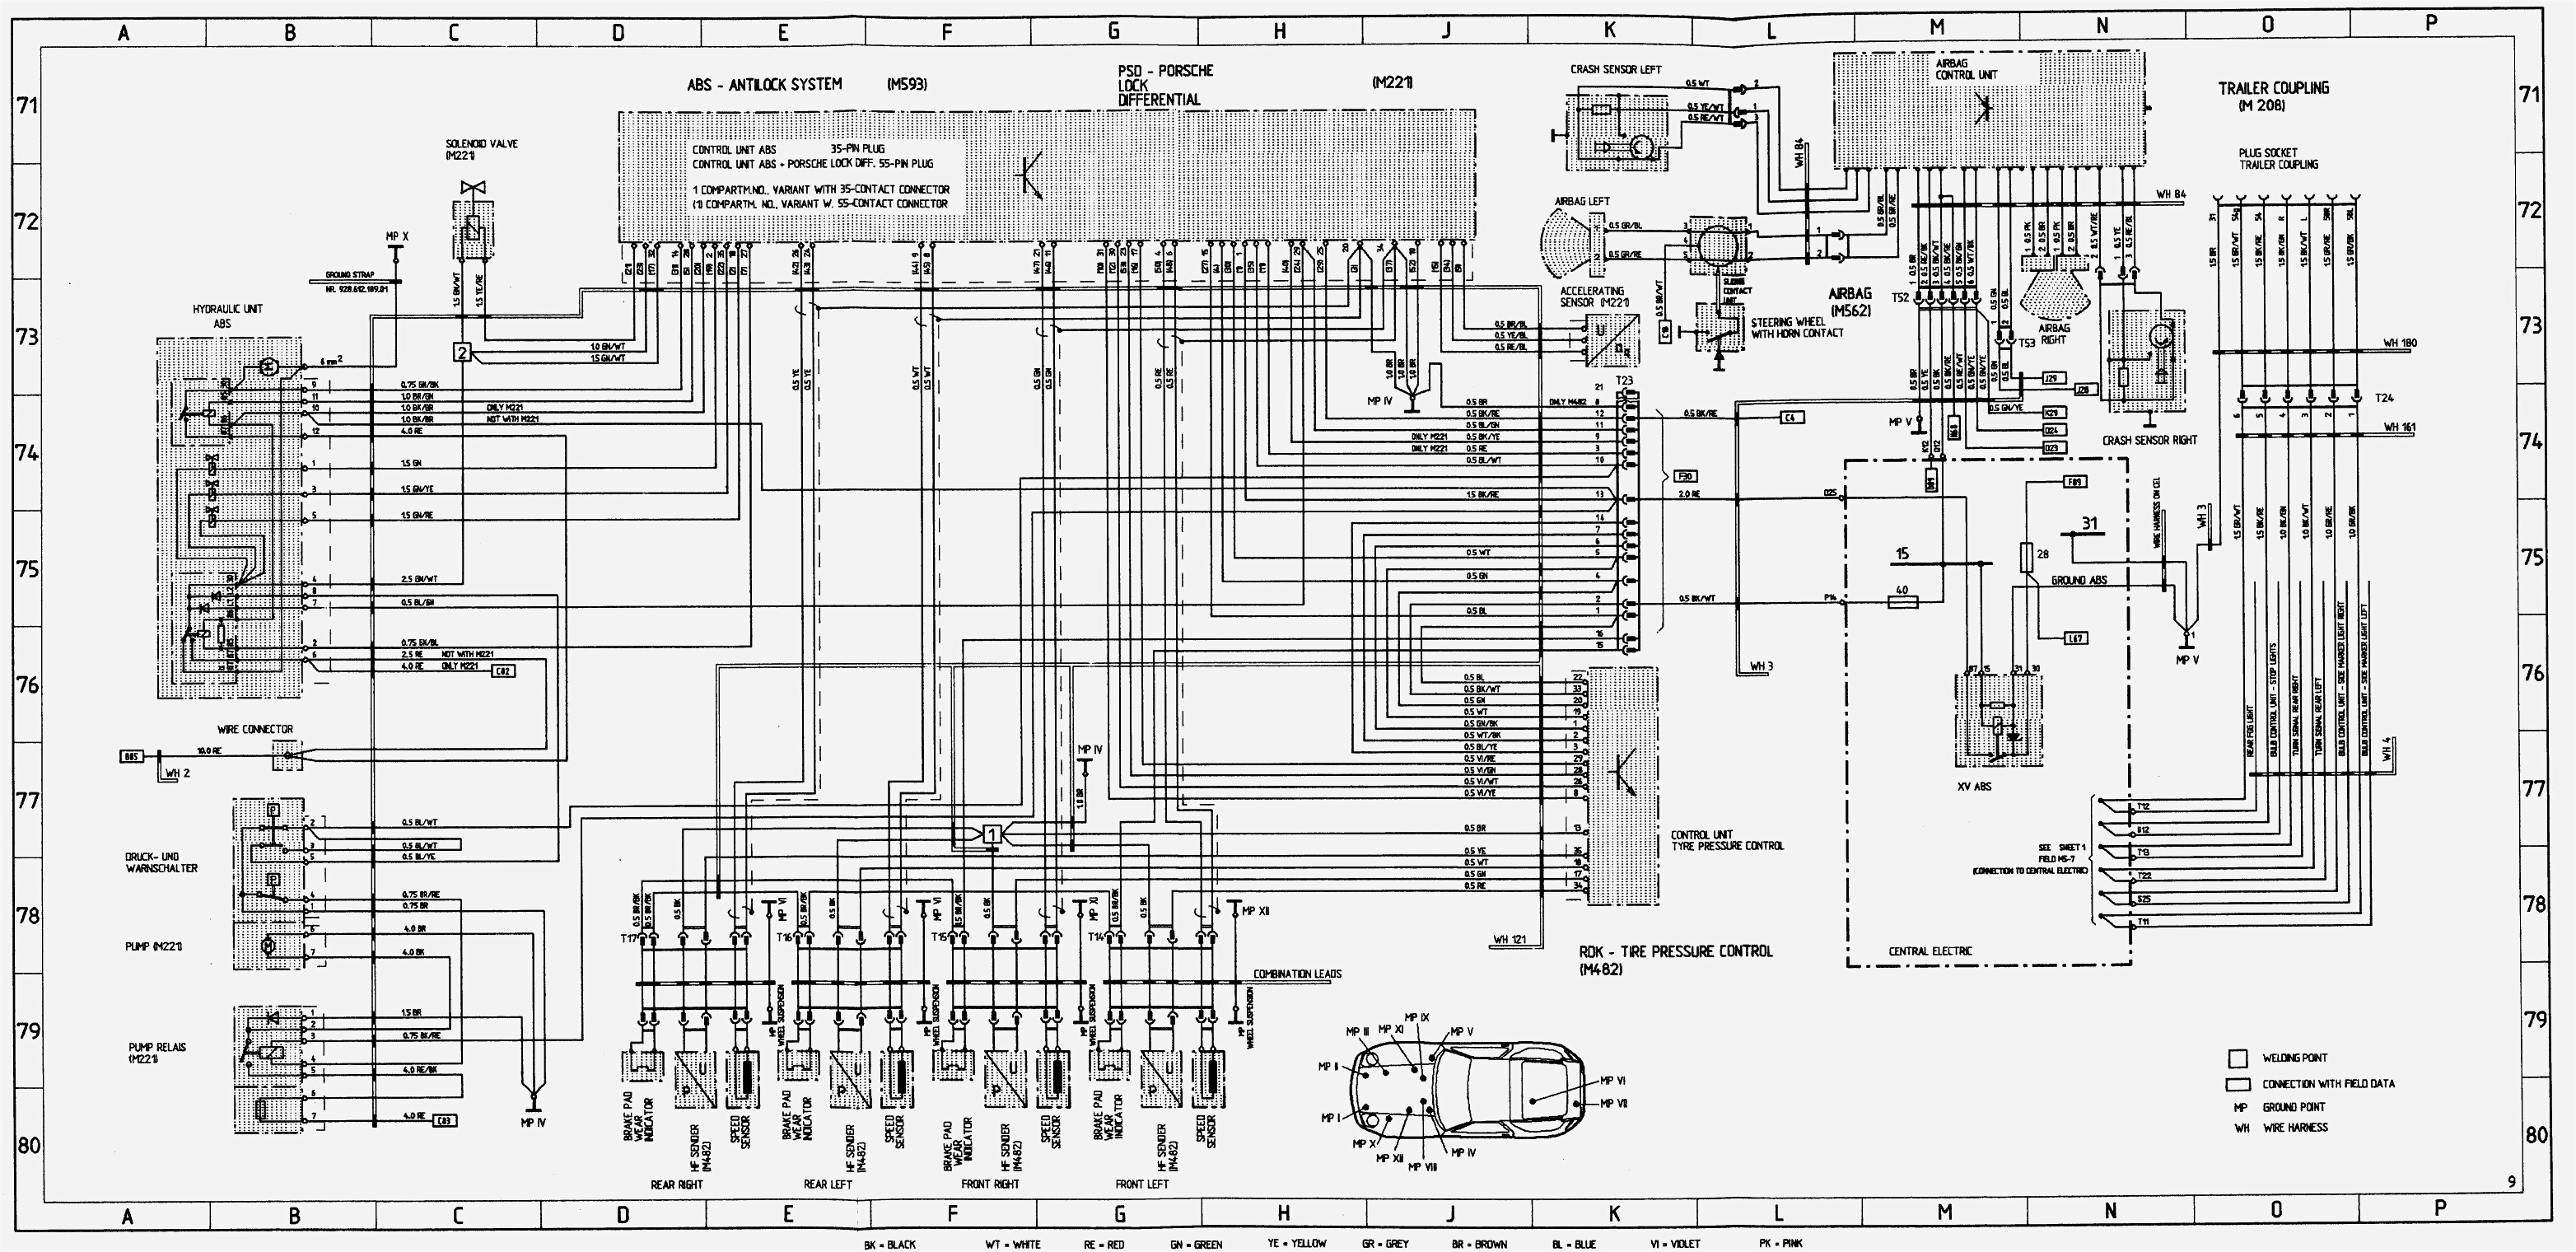 Abs System Diagram Stunning E46 Wiring Diagram S Everything You Need to Know Of Abs System Diagram